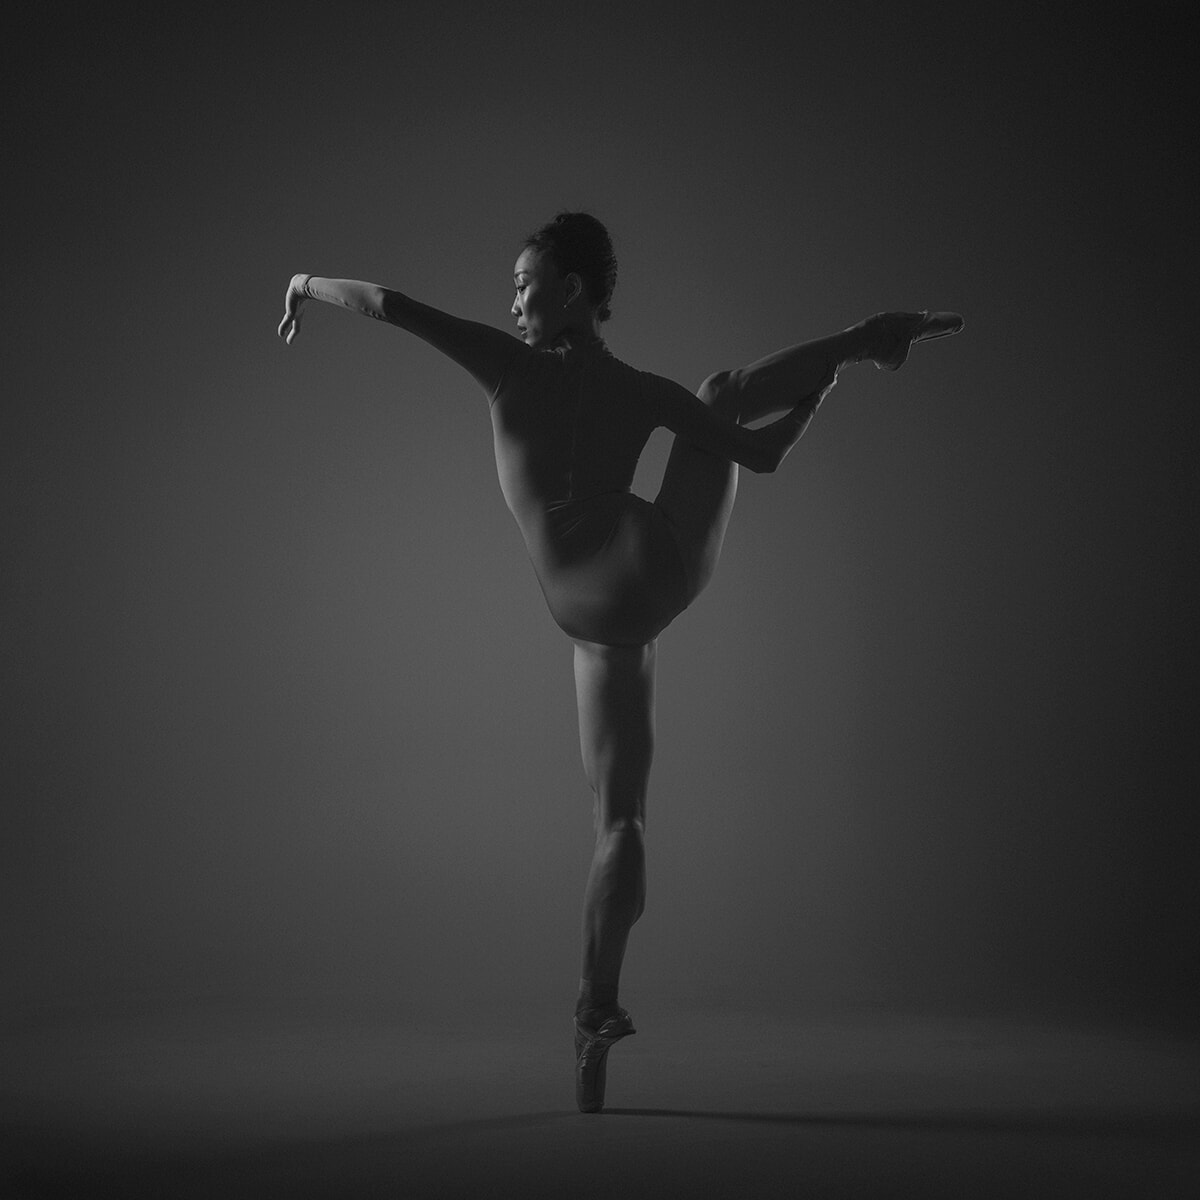 Black and White Photo of a Female Ballet Dancer